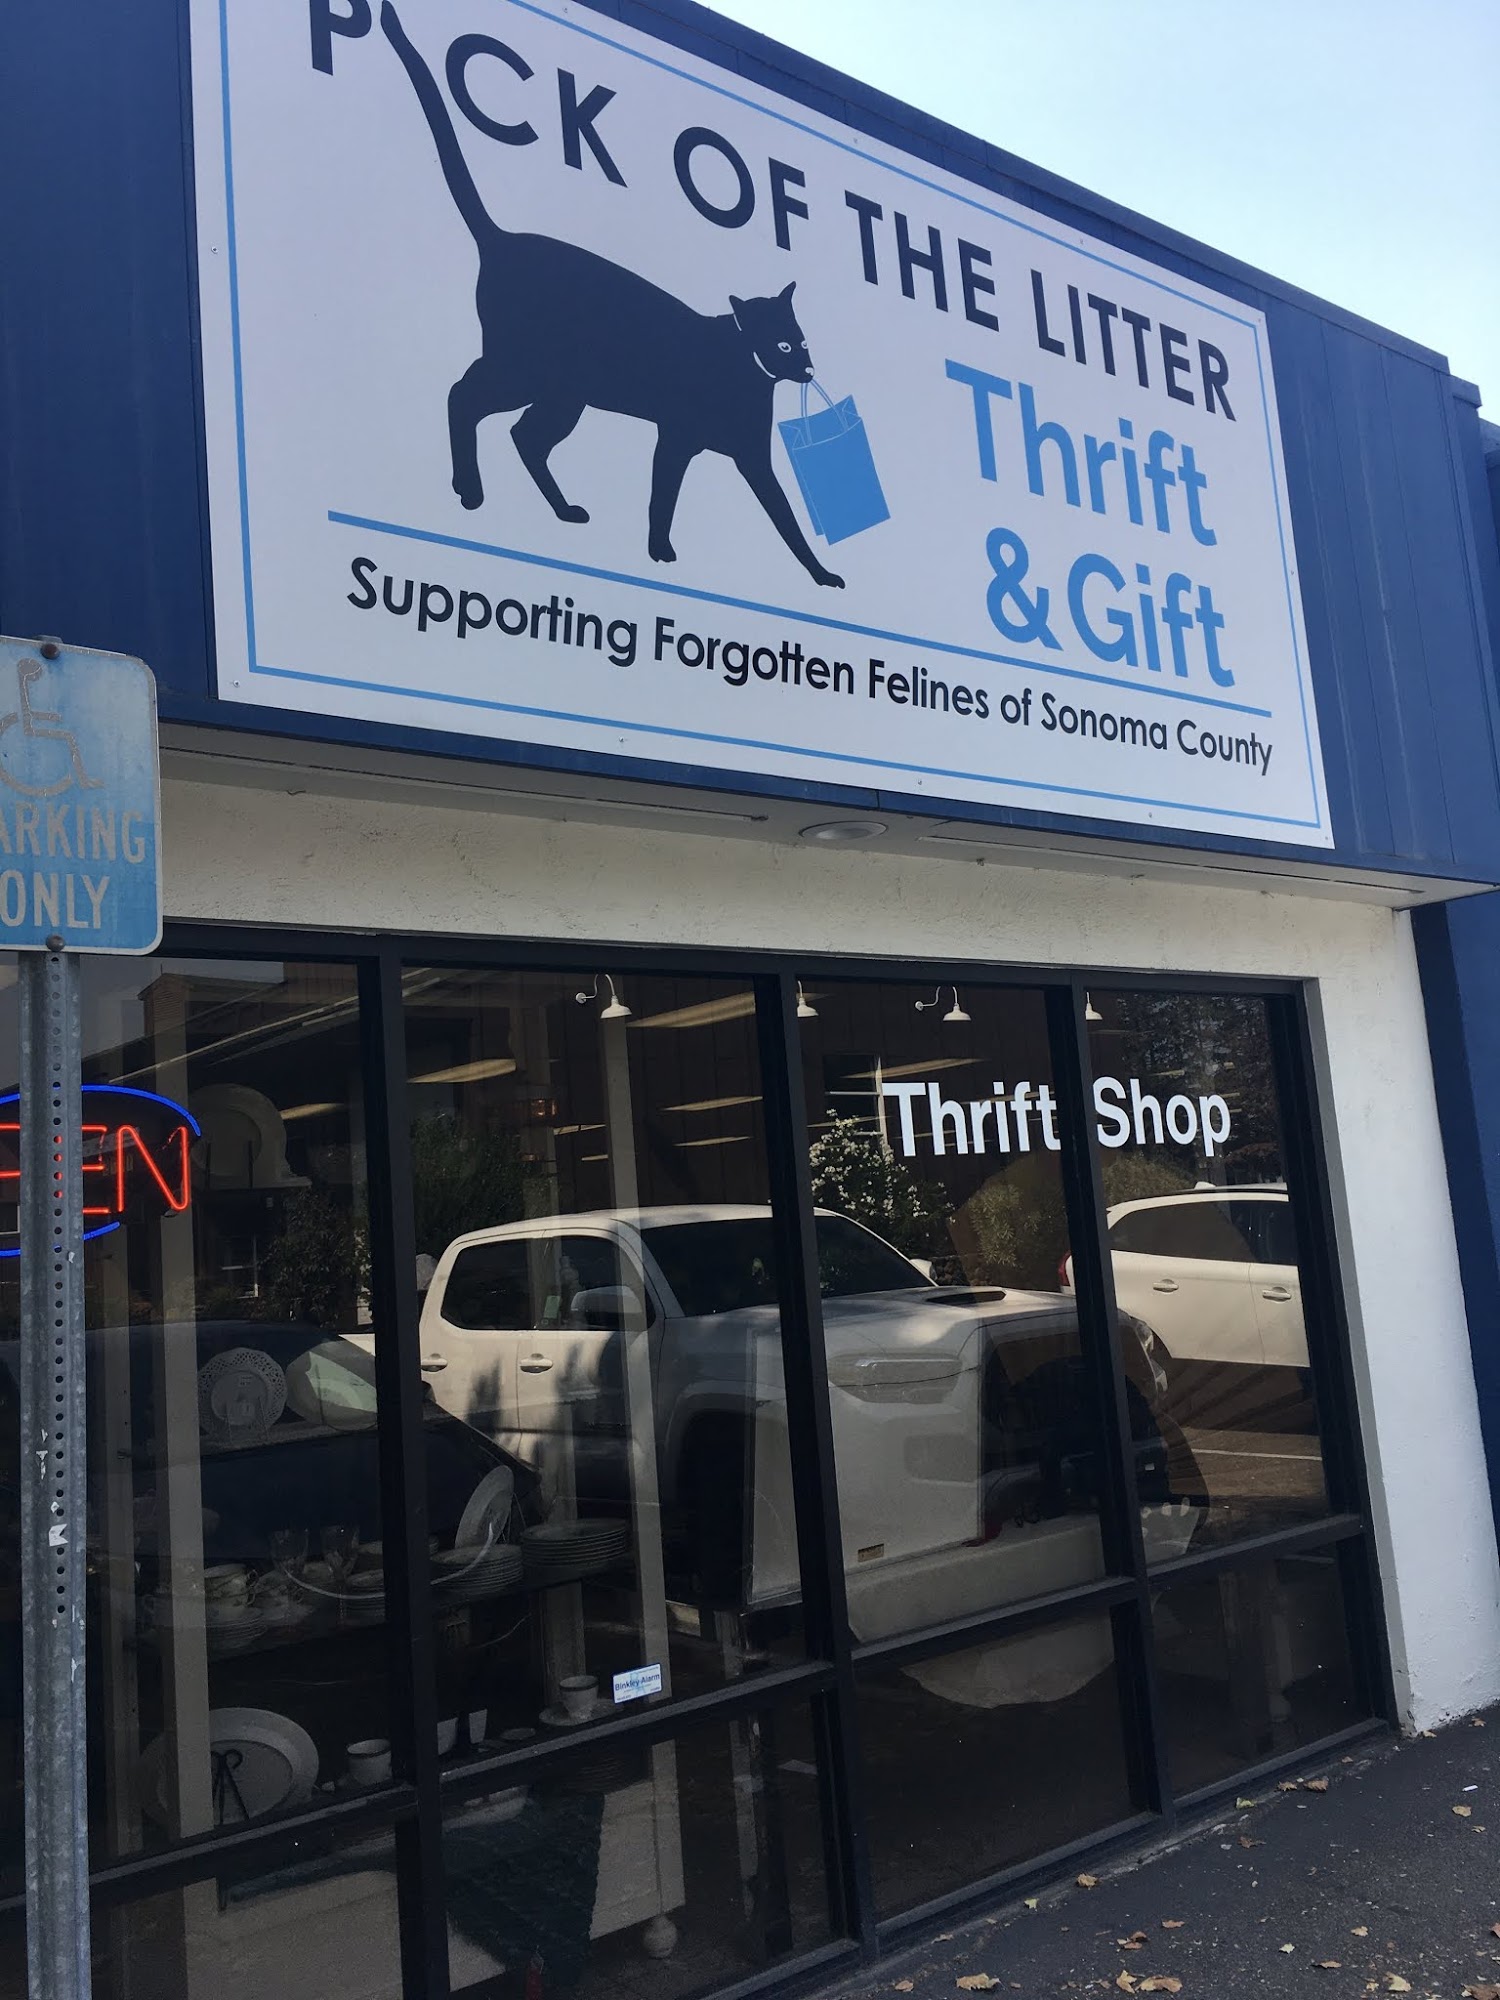 Pick of the Litter Thrift and Gift Shop